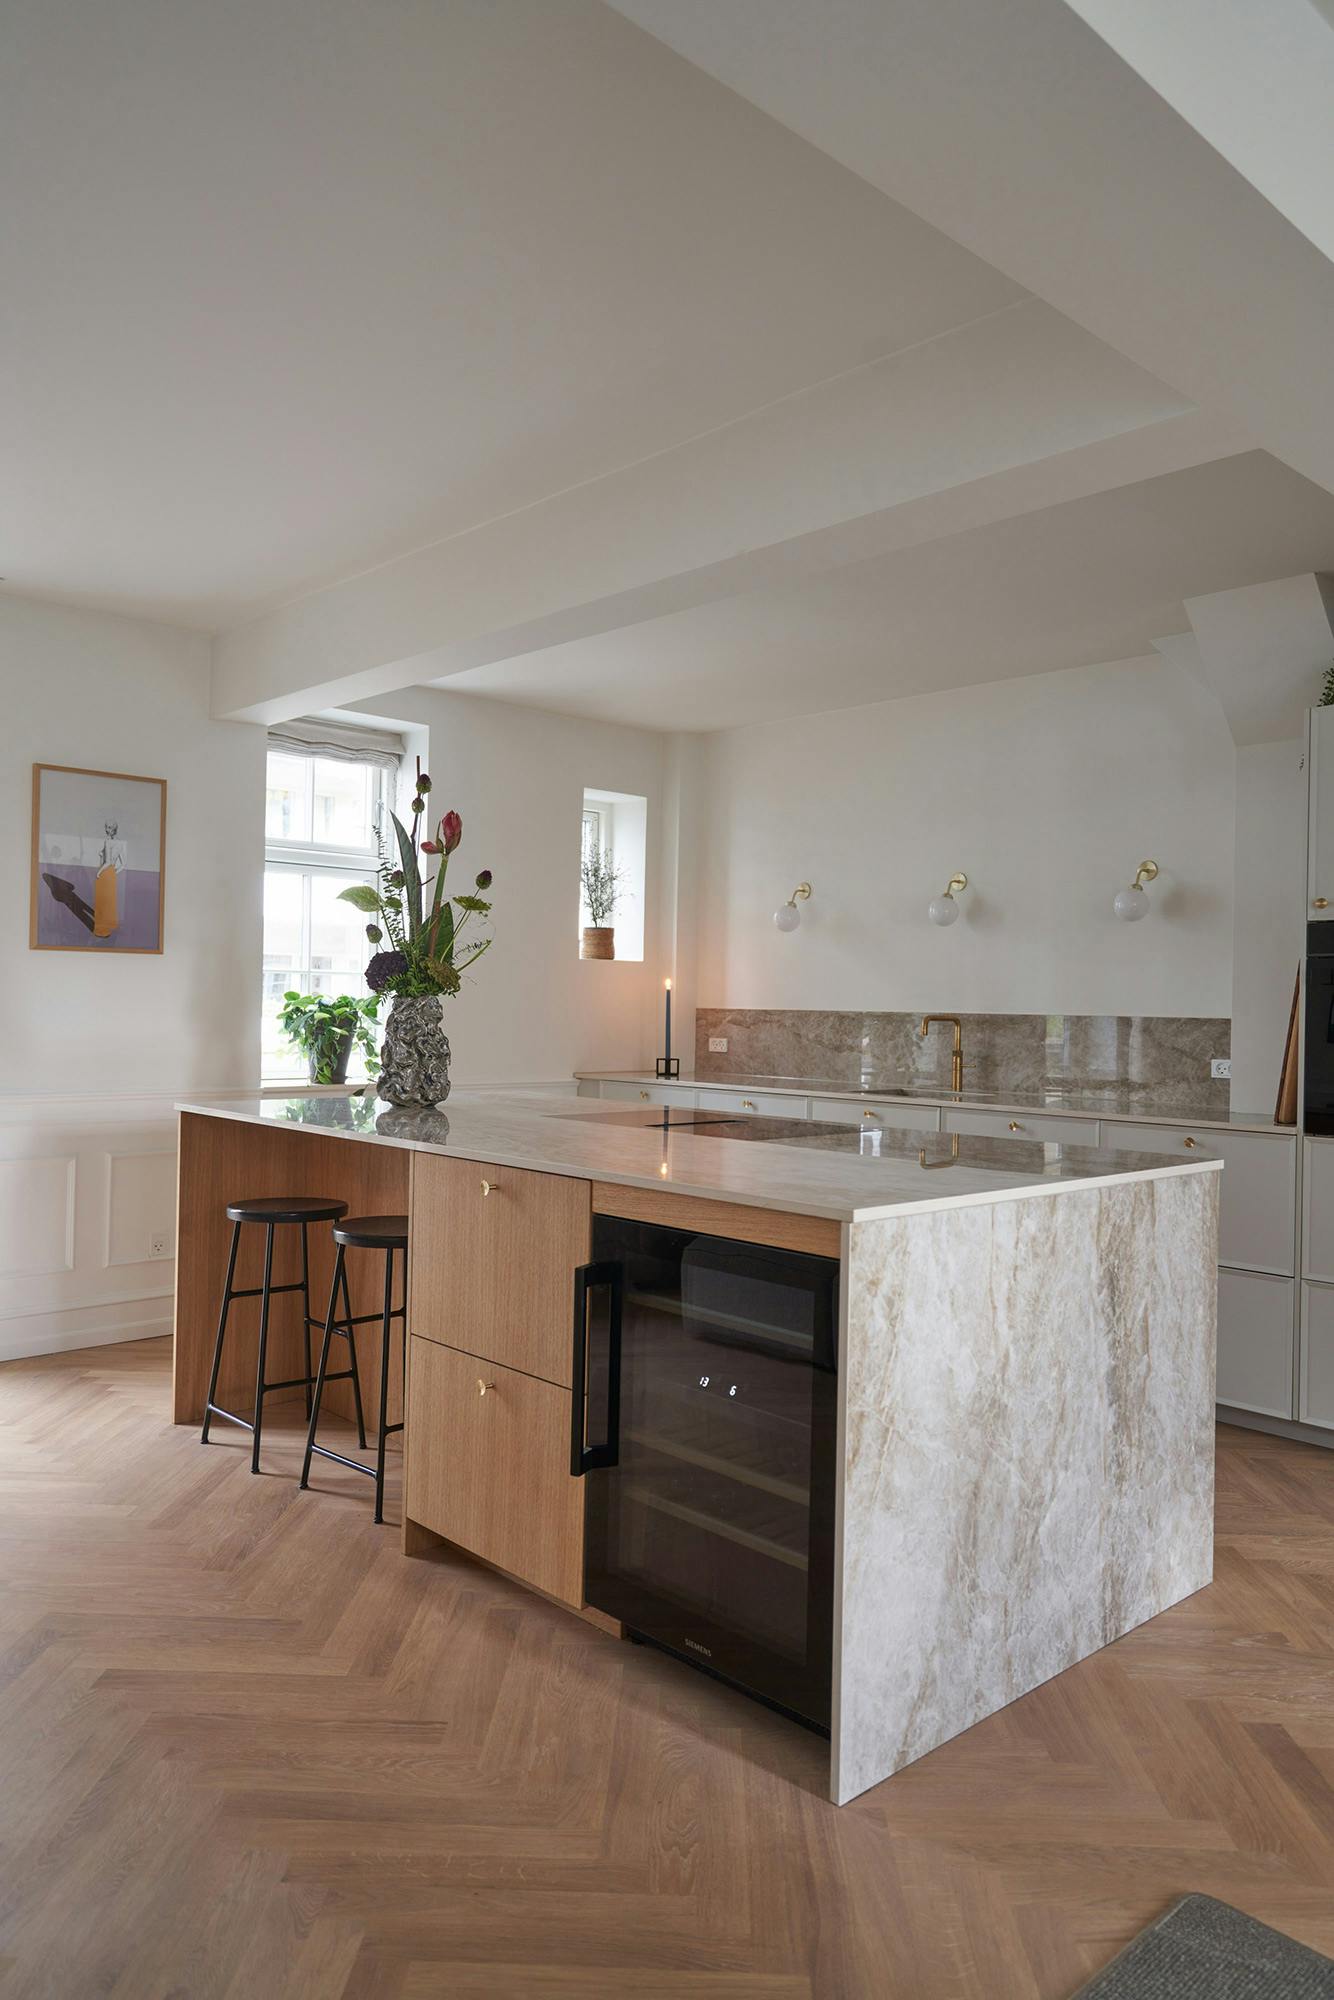 A Danish influencer’s modern kitchen with classic details